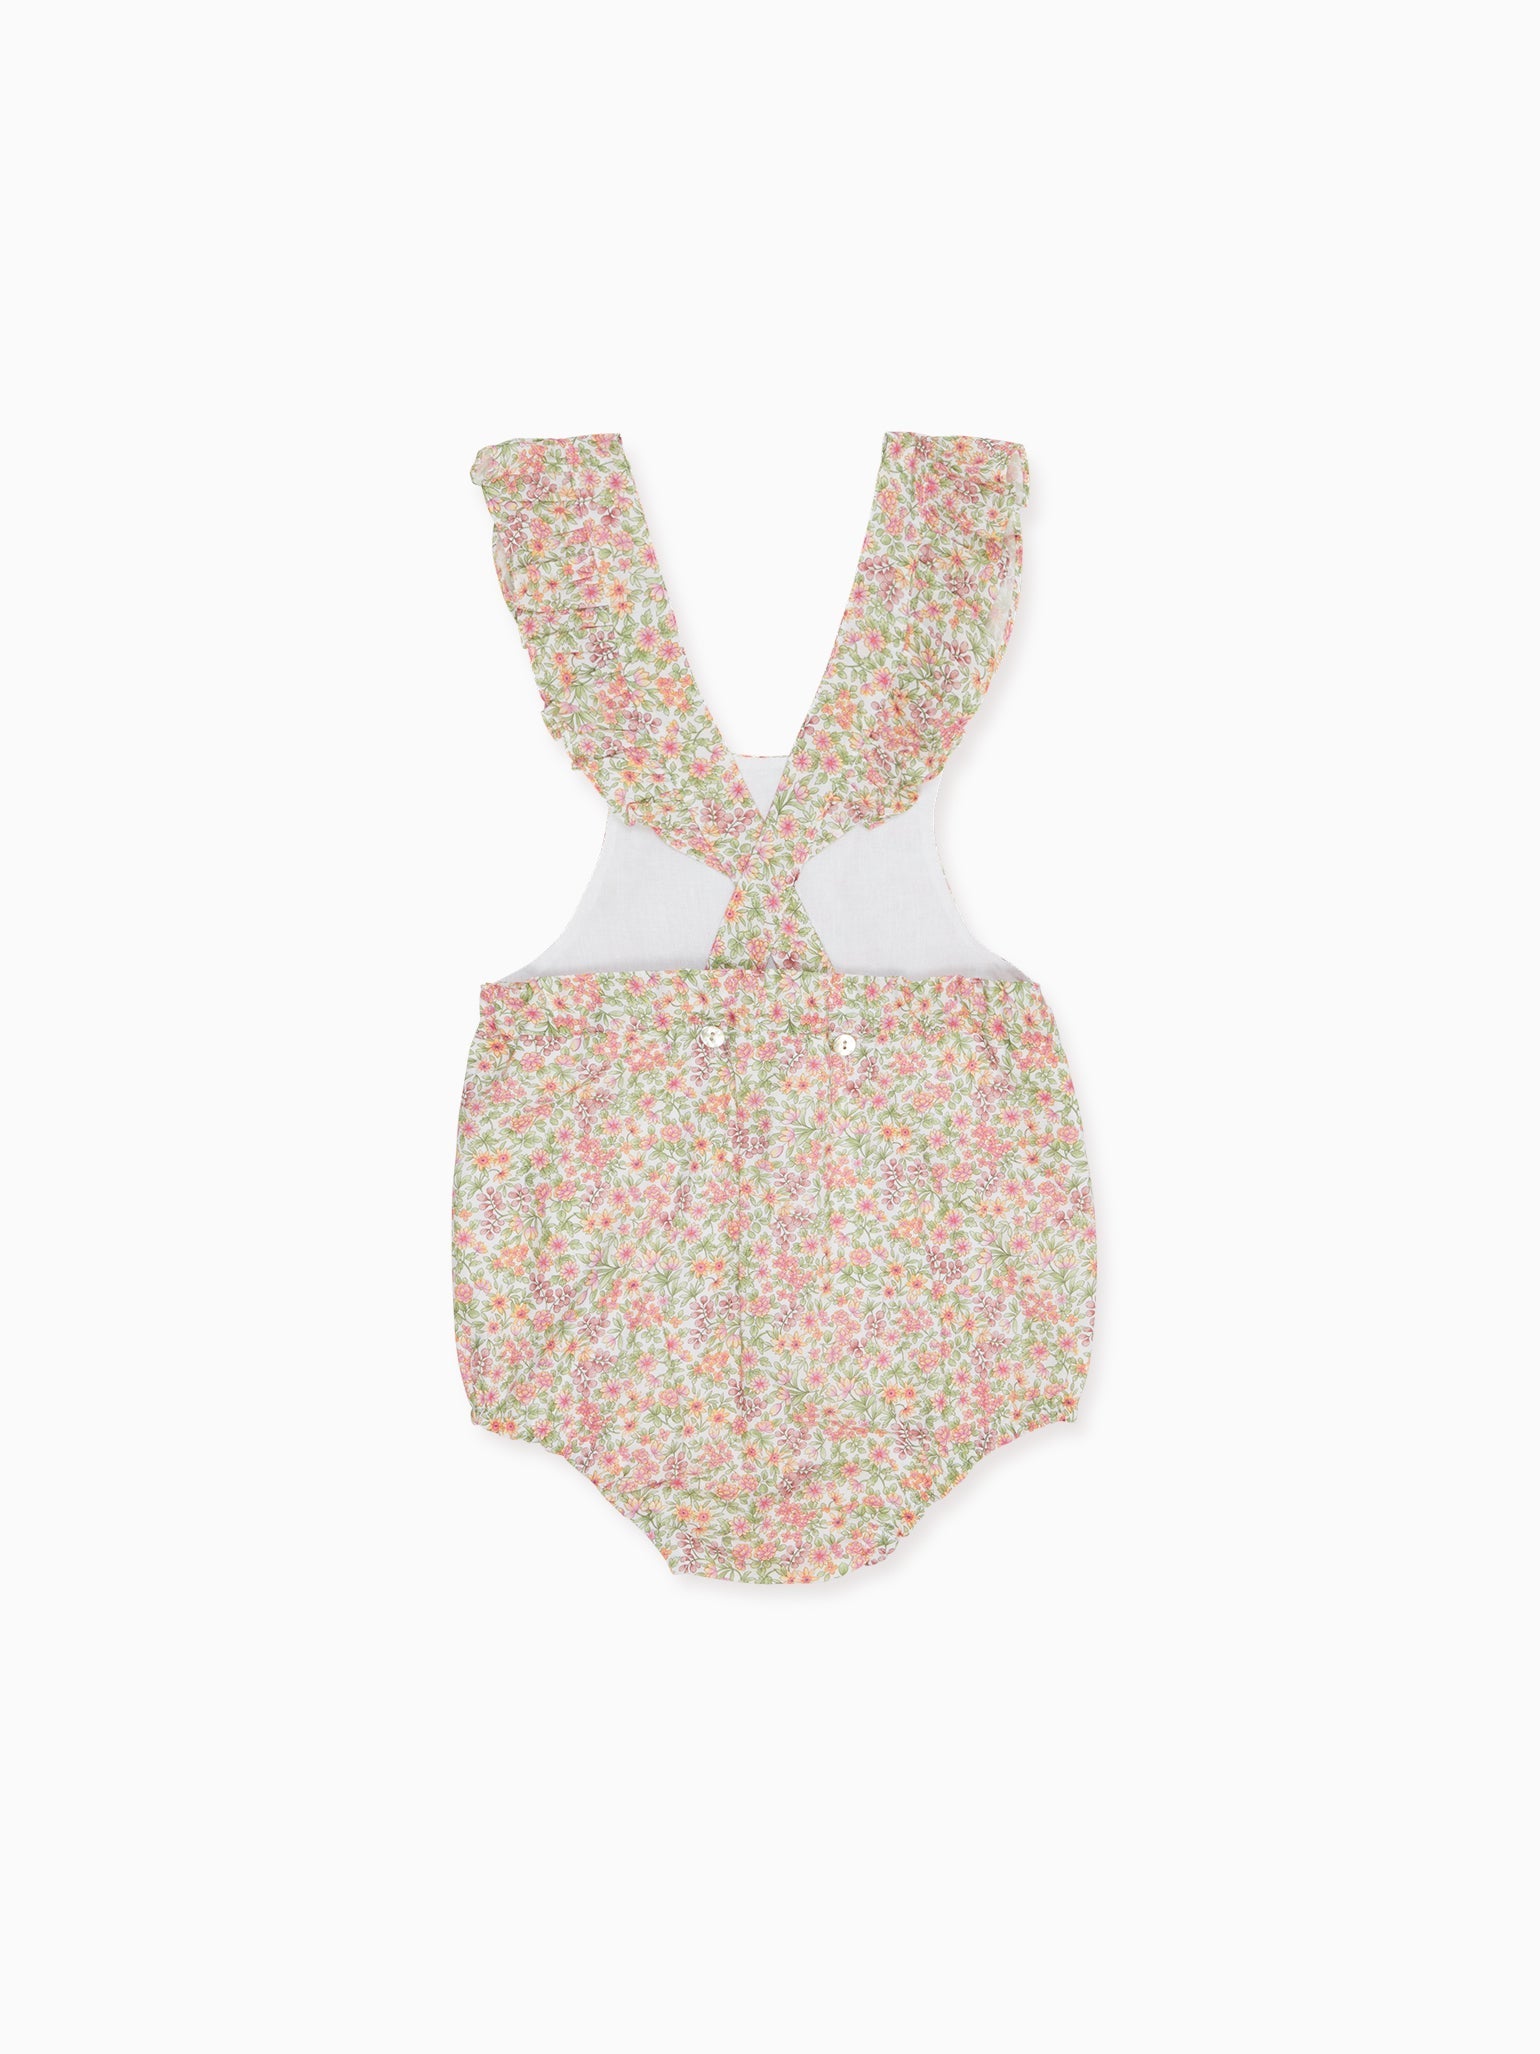 Pink Floral Rontina Baby Girl Romper Overalls